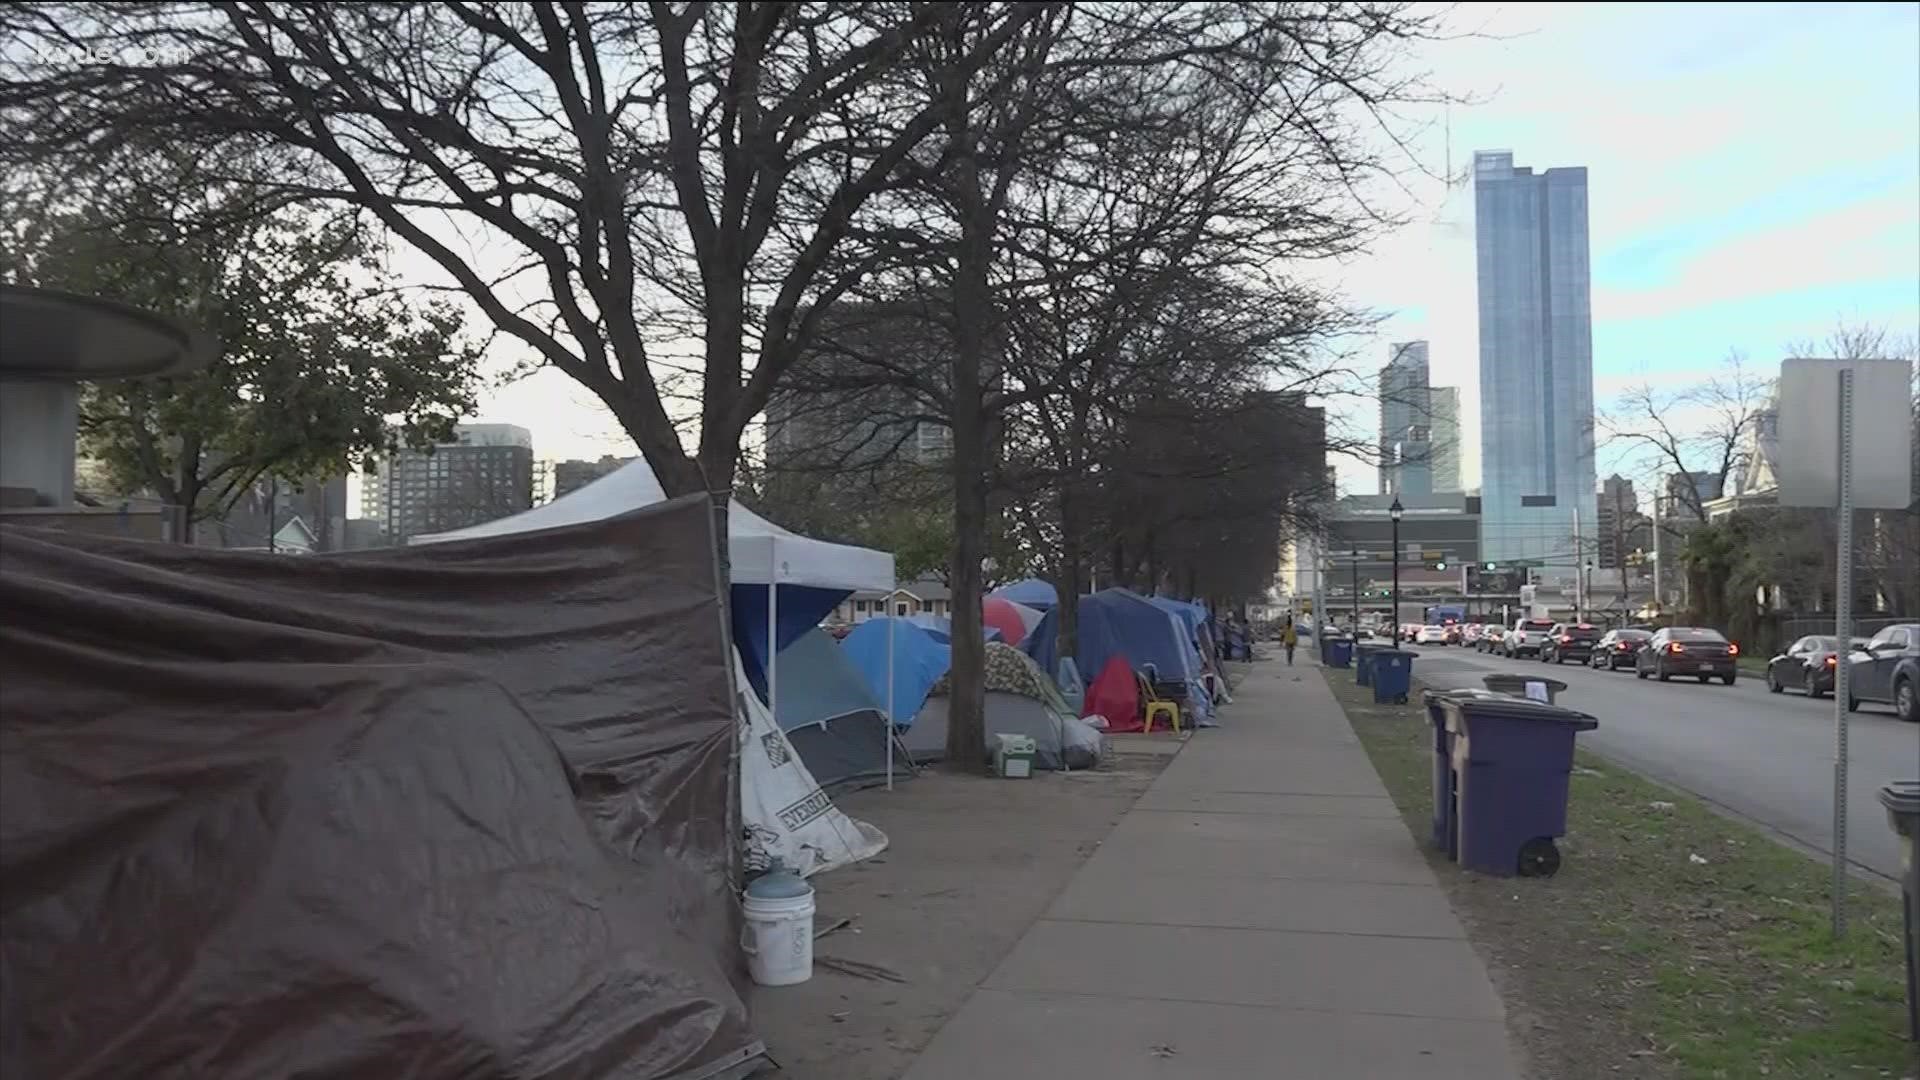 Austin city leaders are still debating a possible plan to make designated camping sites for the city's homeless population.